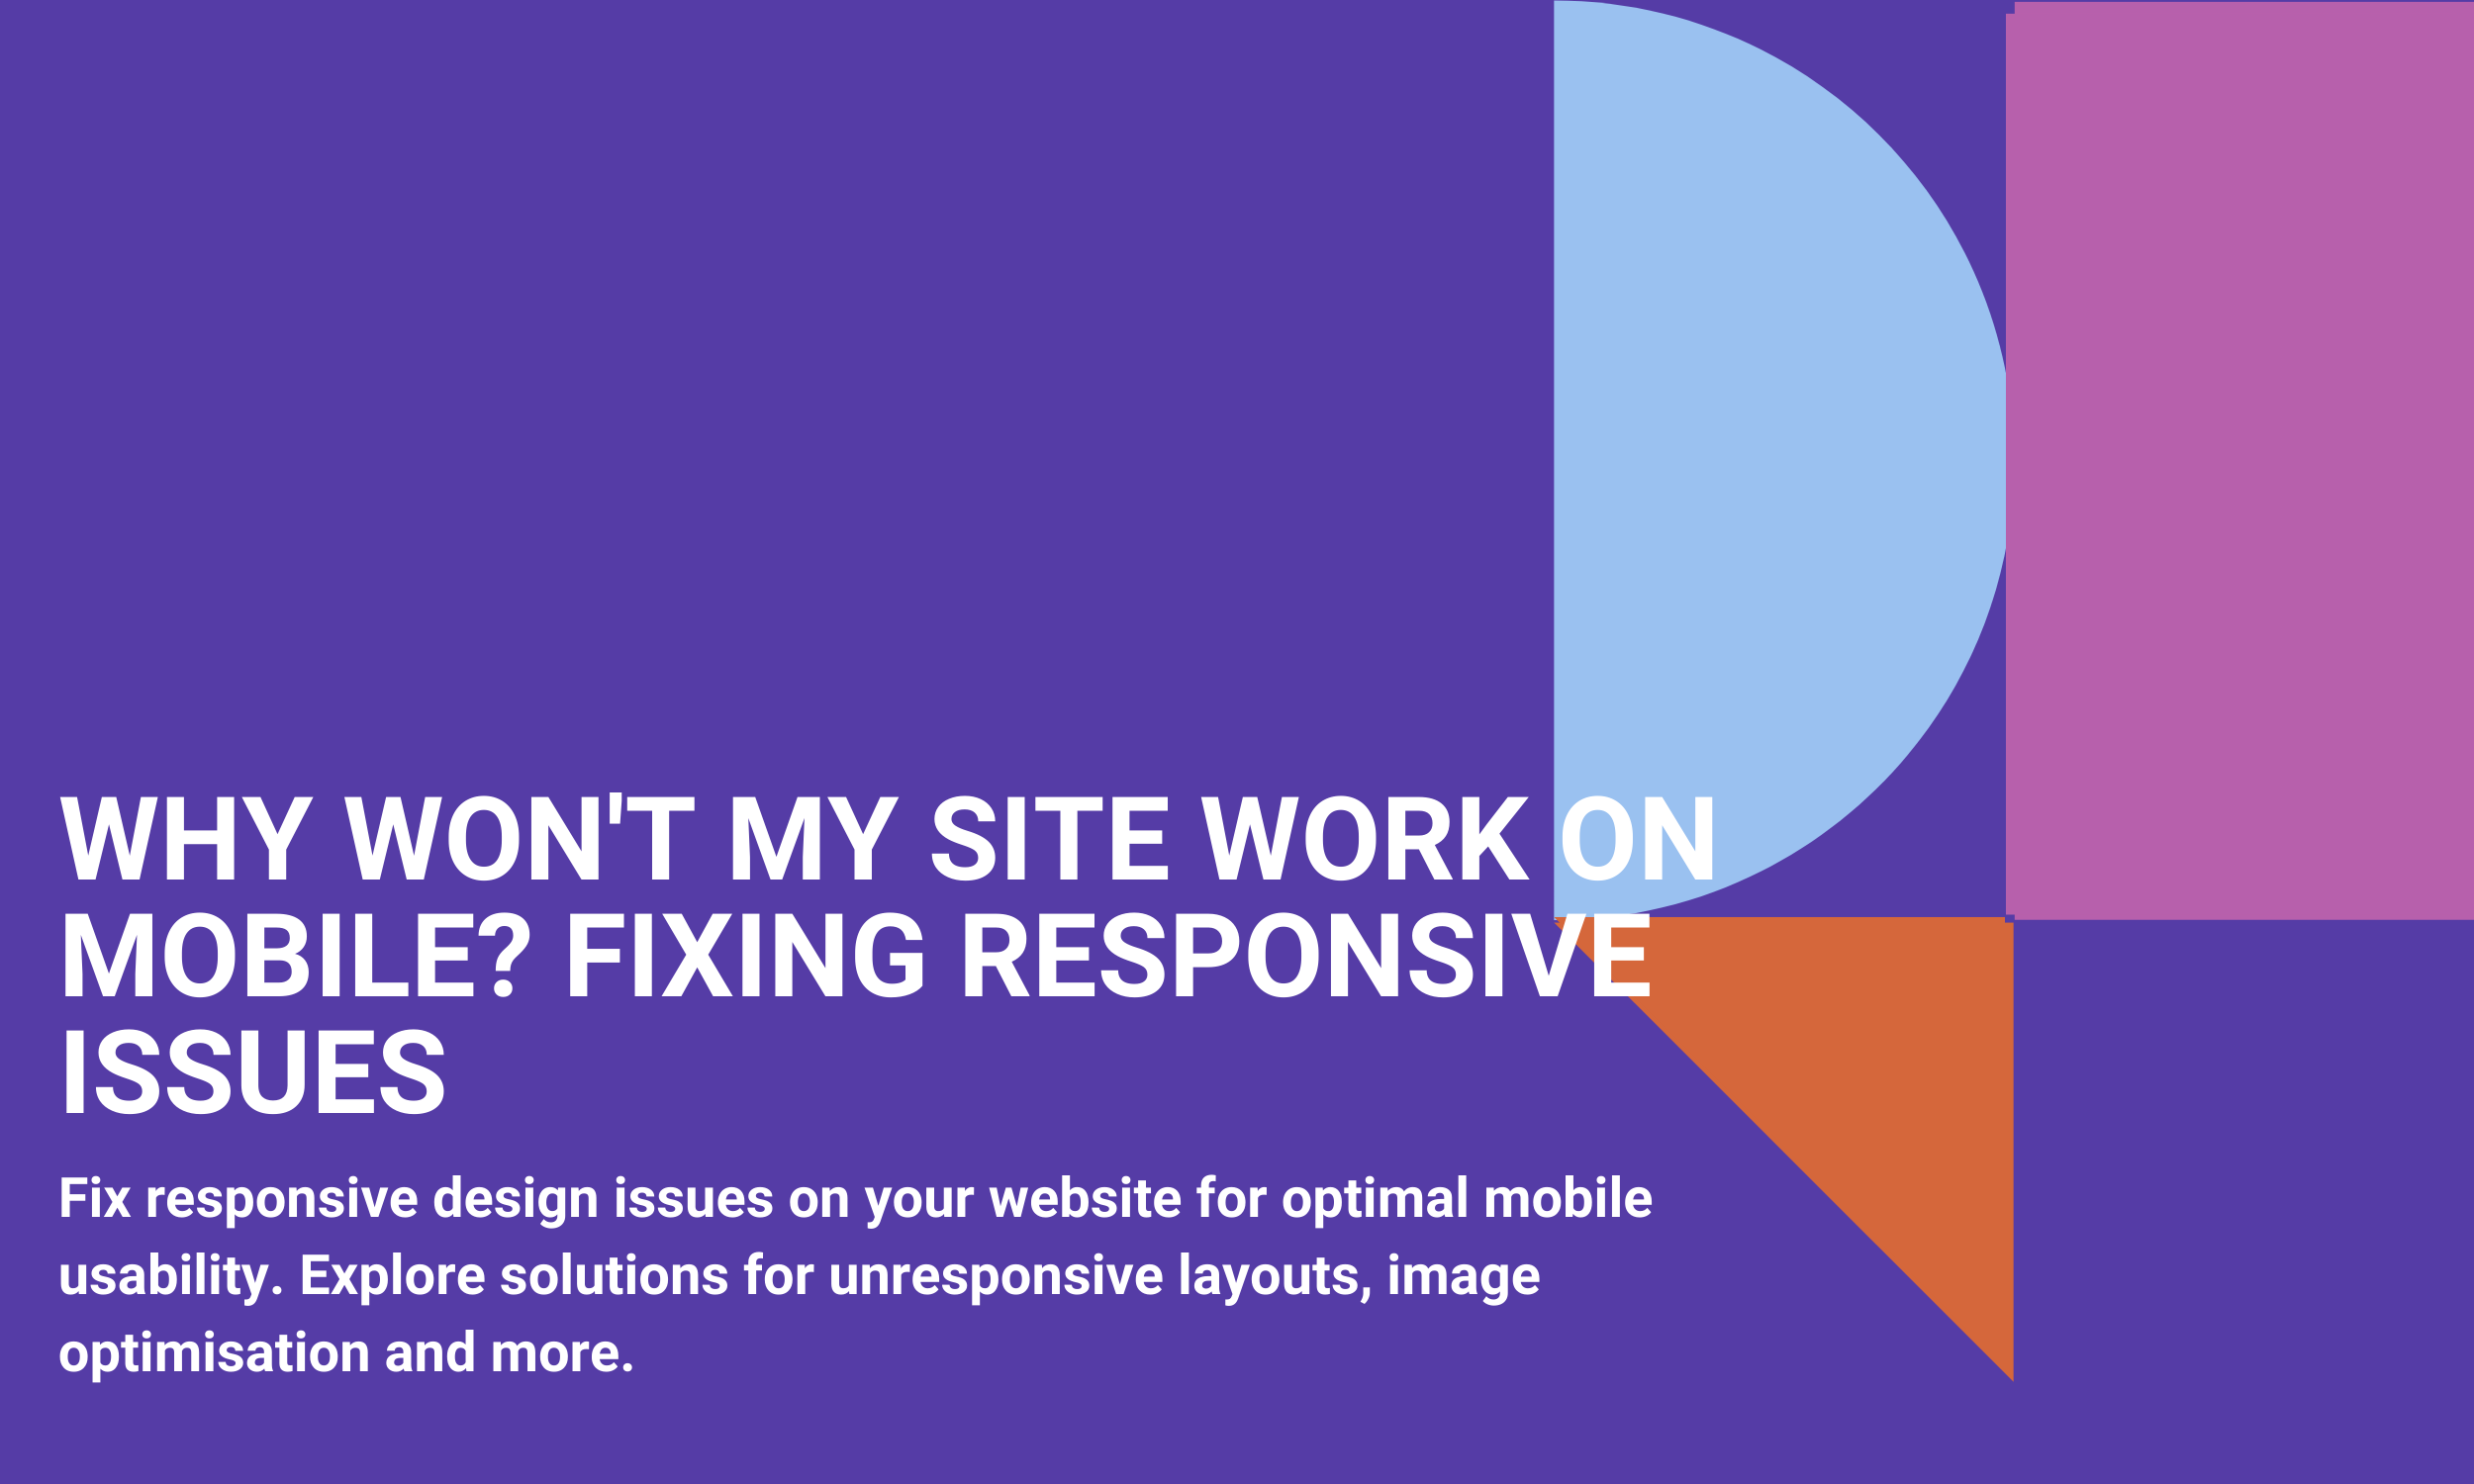 Why Won't My Site Work on Mobile? Fixing Responsive Issues